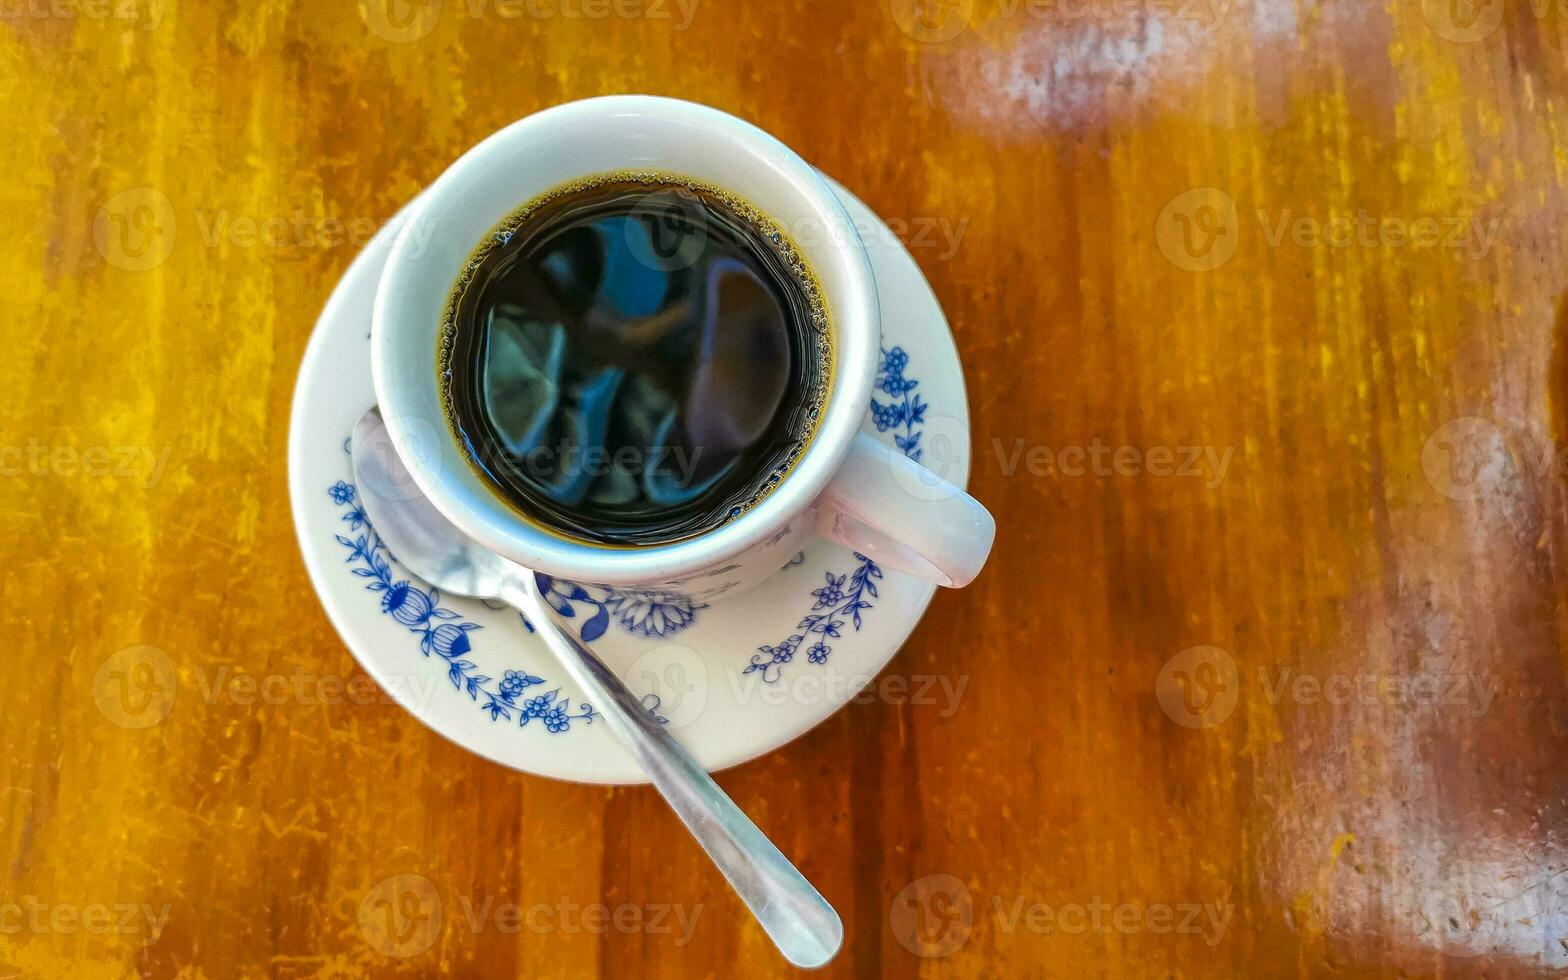 https://static.vecteezy.com/system/resources/previews/024/351/136/non_2x/blue-white-cup-pot-with-black-coffee-wooden-table-mexico-photo.jpg